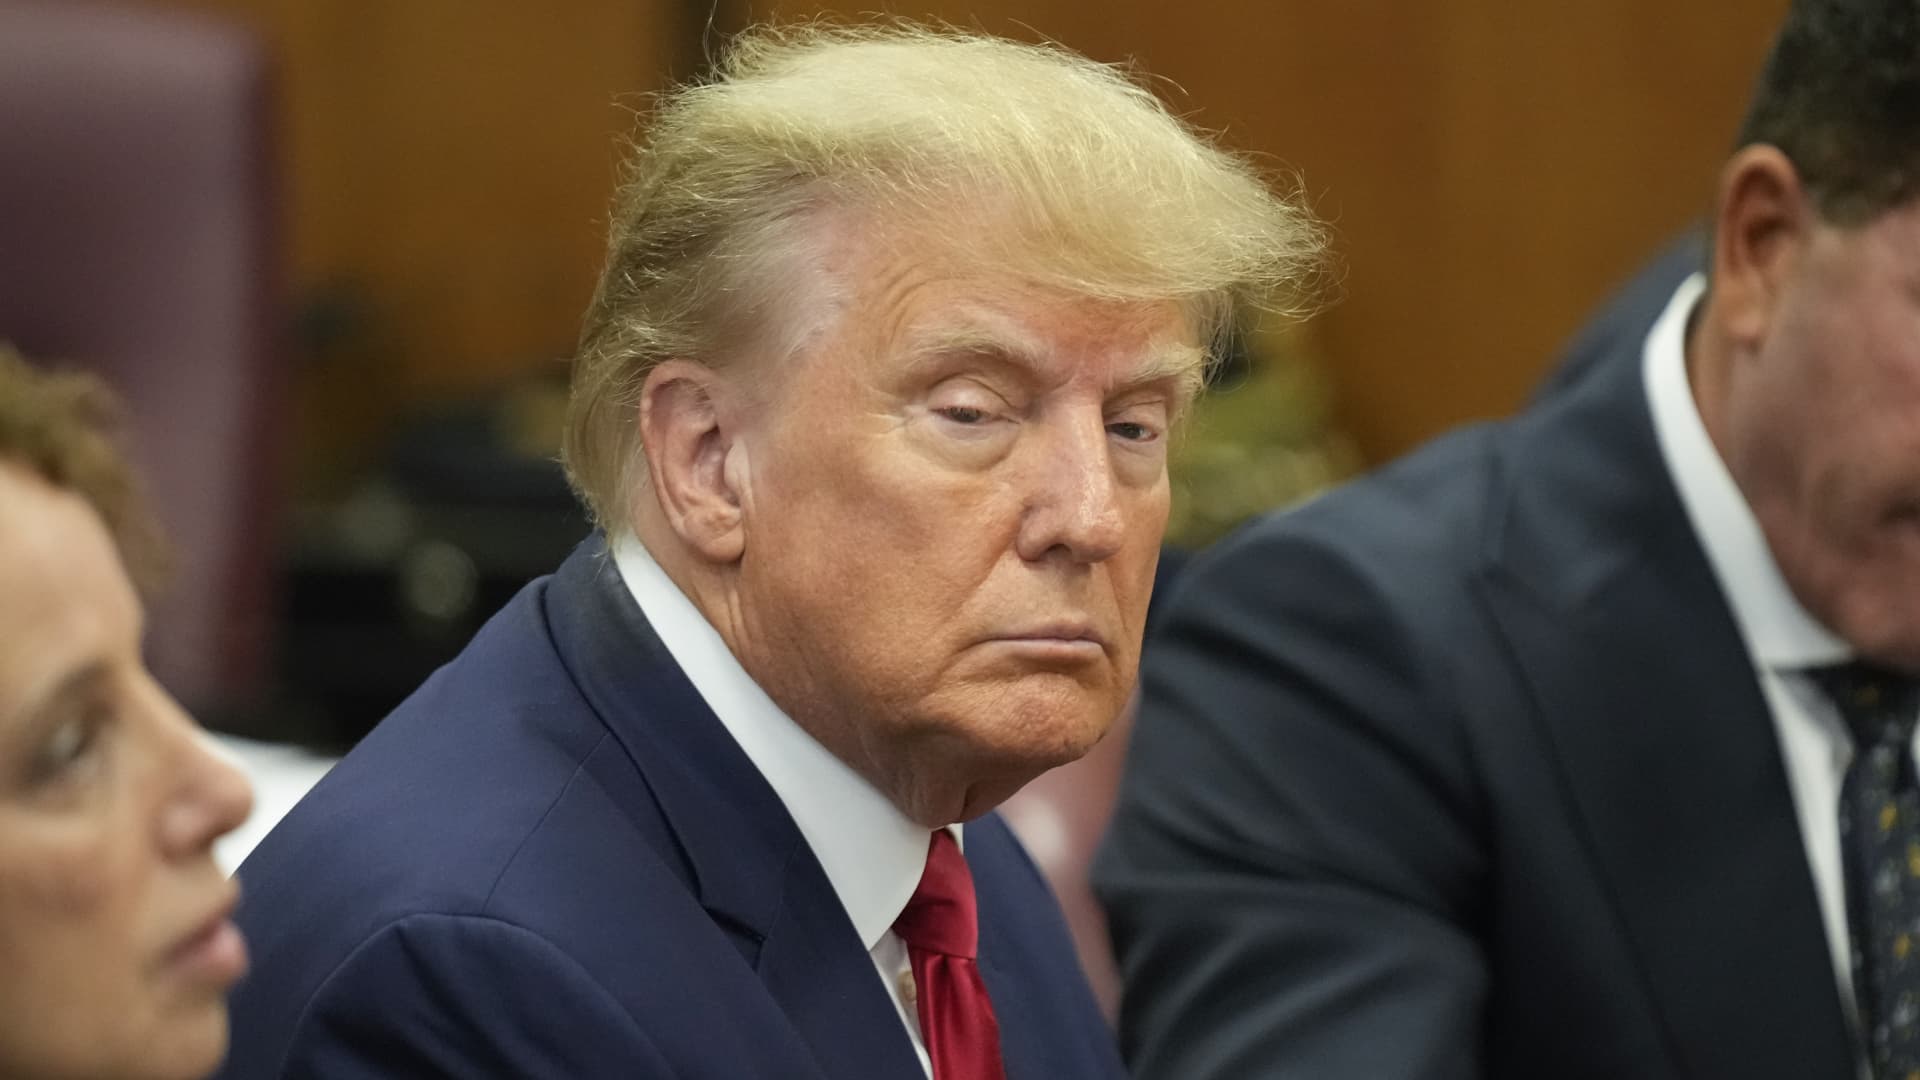 Former President Donald Trump appears in court for his arraignment, Tuesday, April 4, 2023, in New York. Trump surrendered to authorities ahead of his arraignment on criminal charges stemming from a hush money payment to a porn actor during his 2016 campaign. 